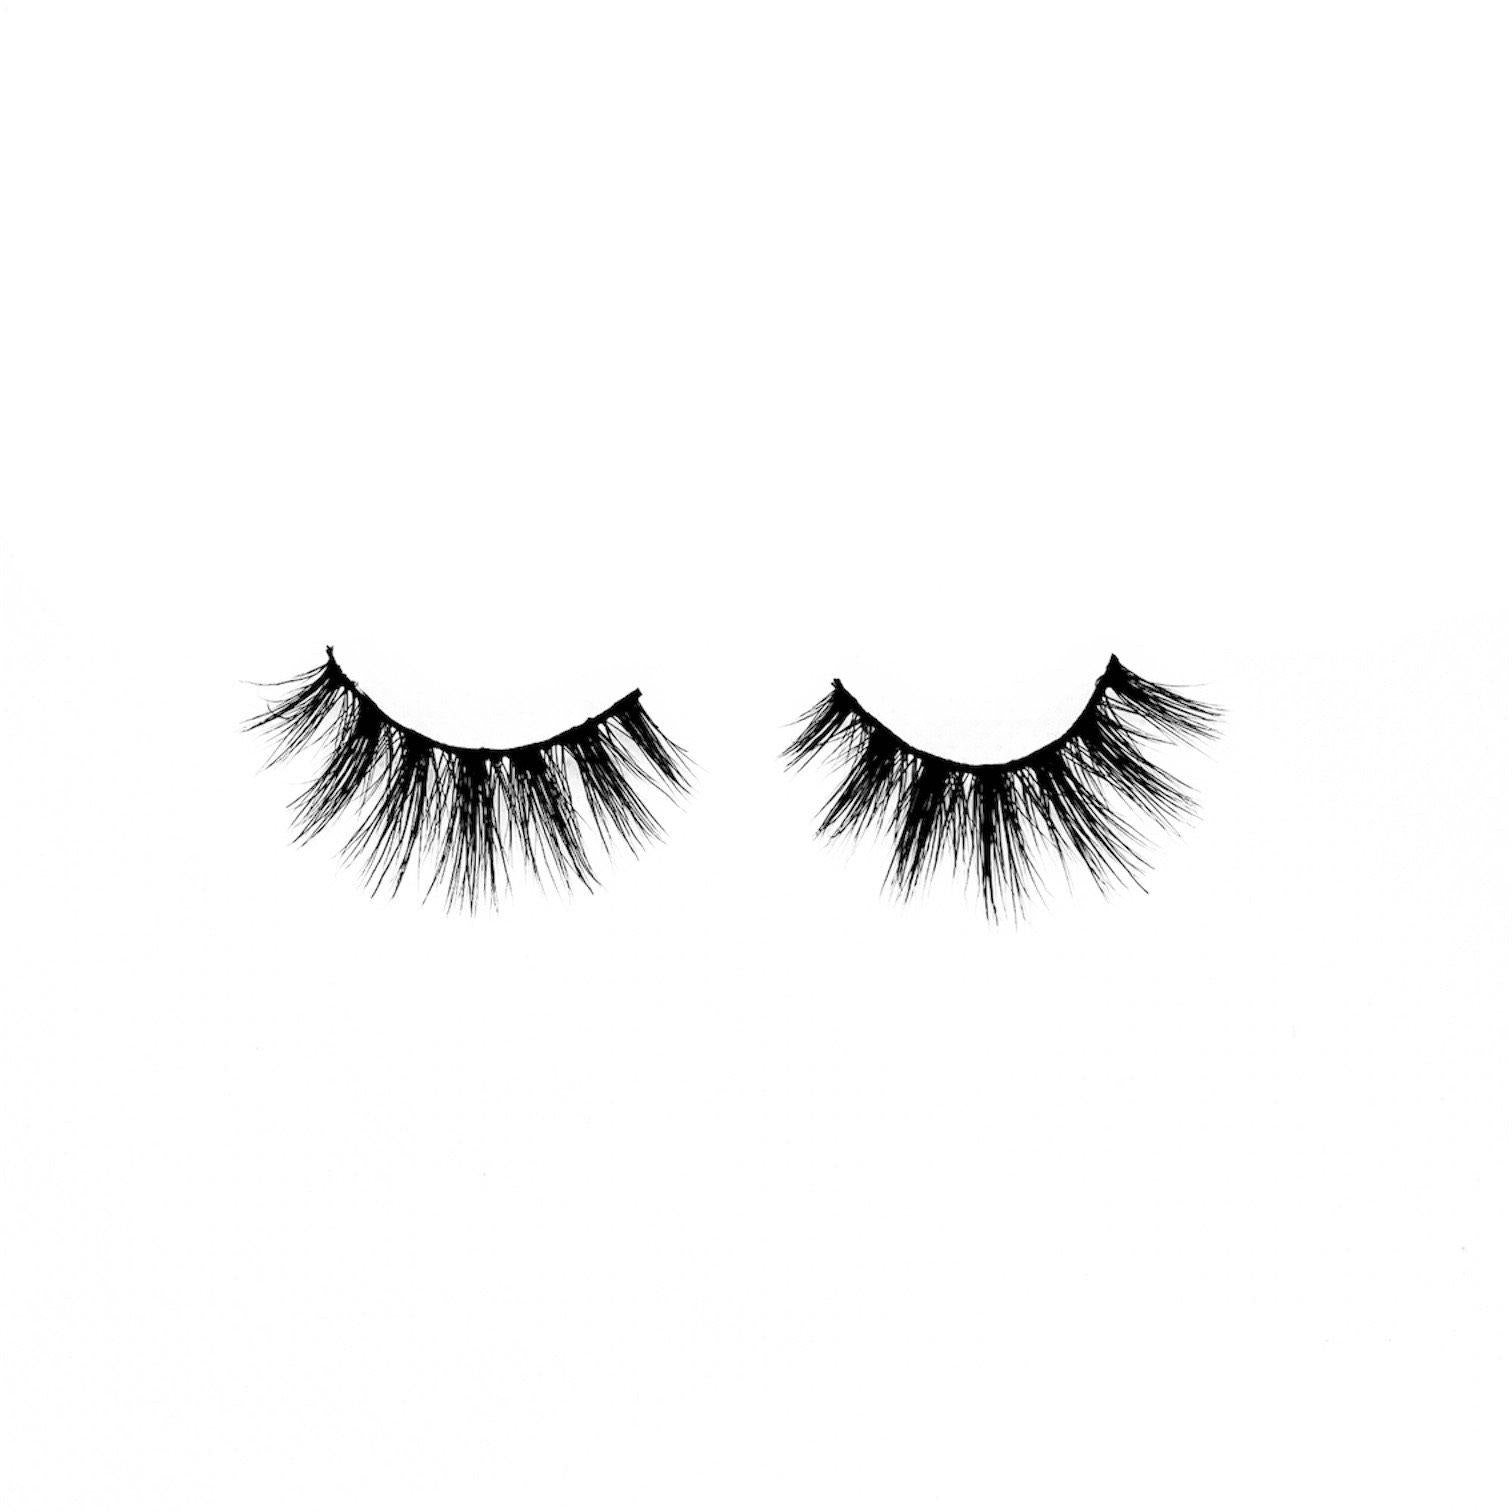 Sassy-Medium Volume-Our “Sassy” lashes are an entire vibe. They’re versatile and have that gorgeous wispy look that everyone loves. "Sassy” is a natural, flirty, medium volume lash that’s designed to enhance and brighten your eyes with longer lengths towards the middle. These are a MUST HAVE for your go-to collection. Description Handmade, Cruelty-Free, Wear up to 30x Material: 100% Mink Band: Black Cotton Band Volume: Medium Style: Wispy, Open-eye, Flirty, Natural To Use: Measure and size your 